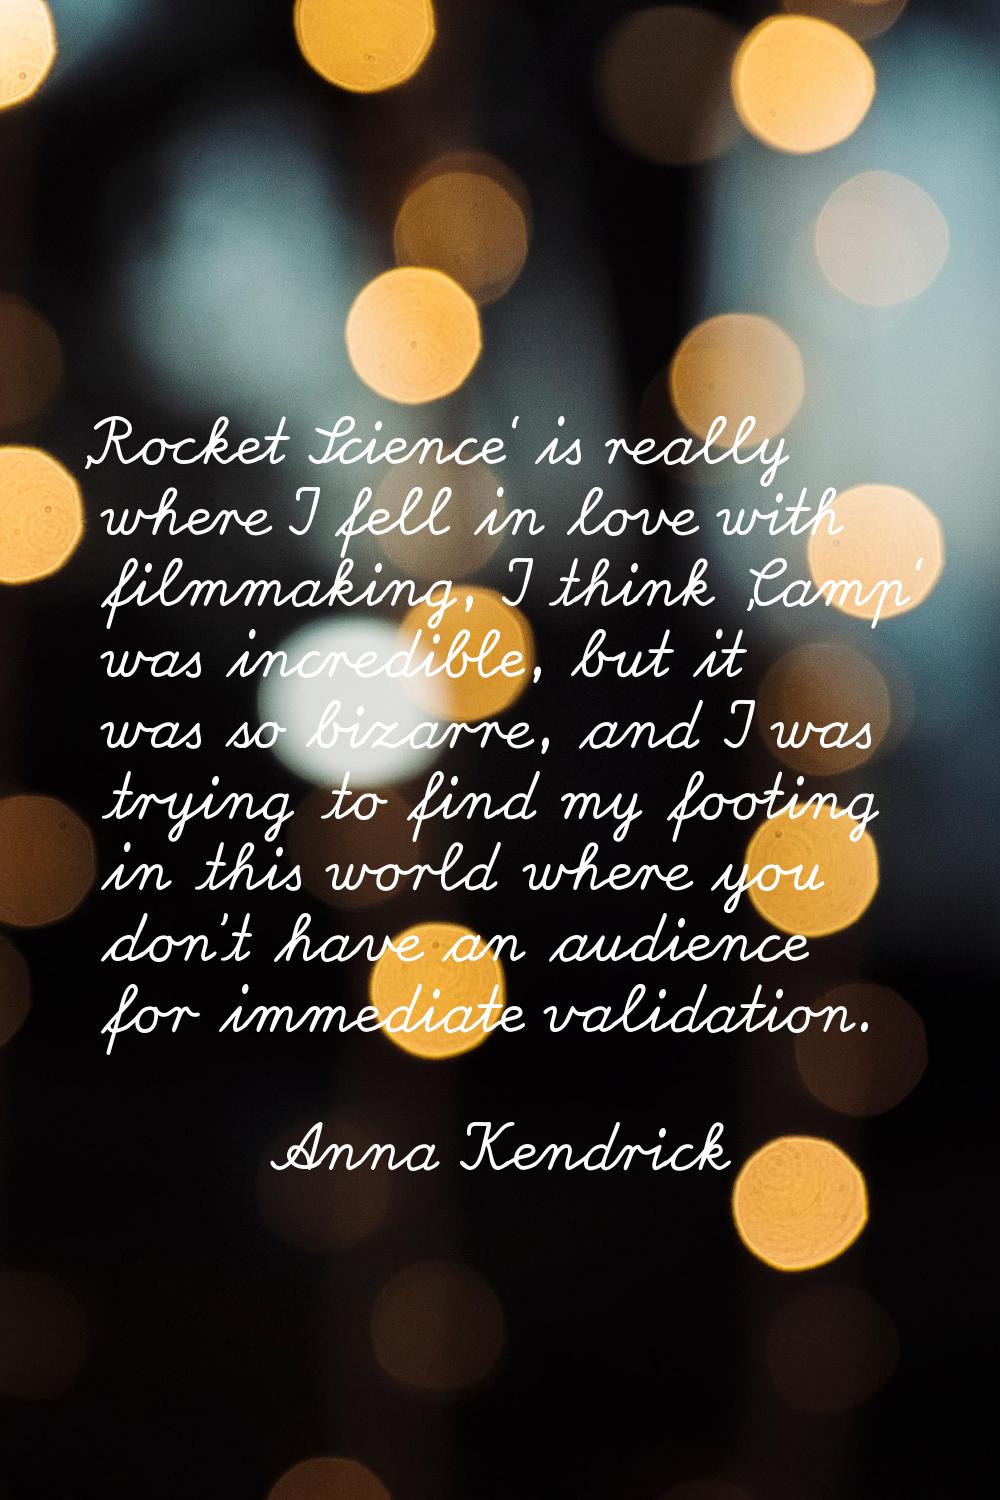 'Rocket Science' is really where I fell in love with filmmaking, I think 'Camp' was incredible, but